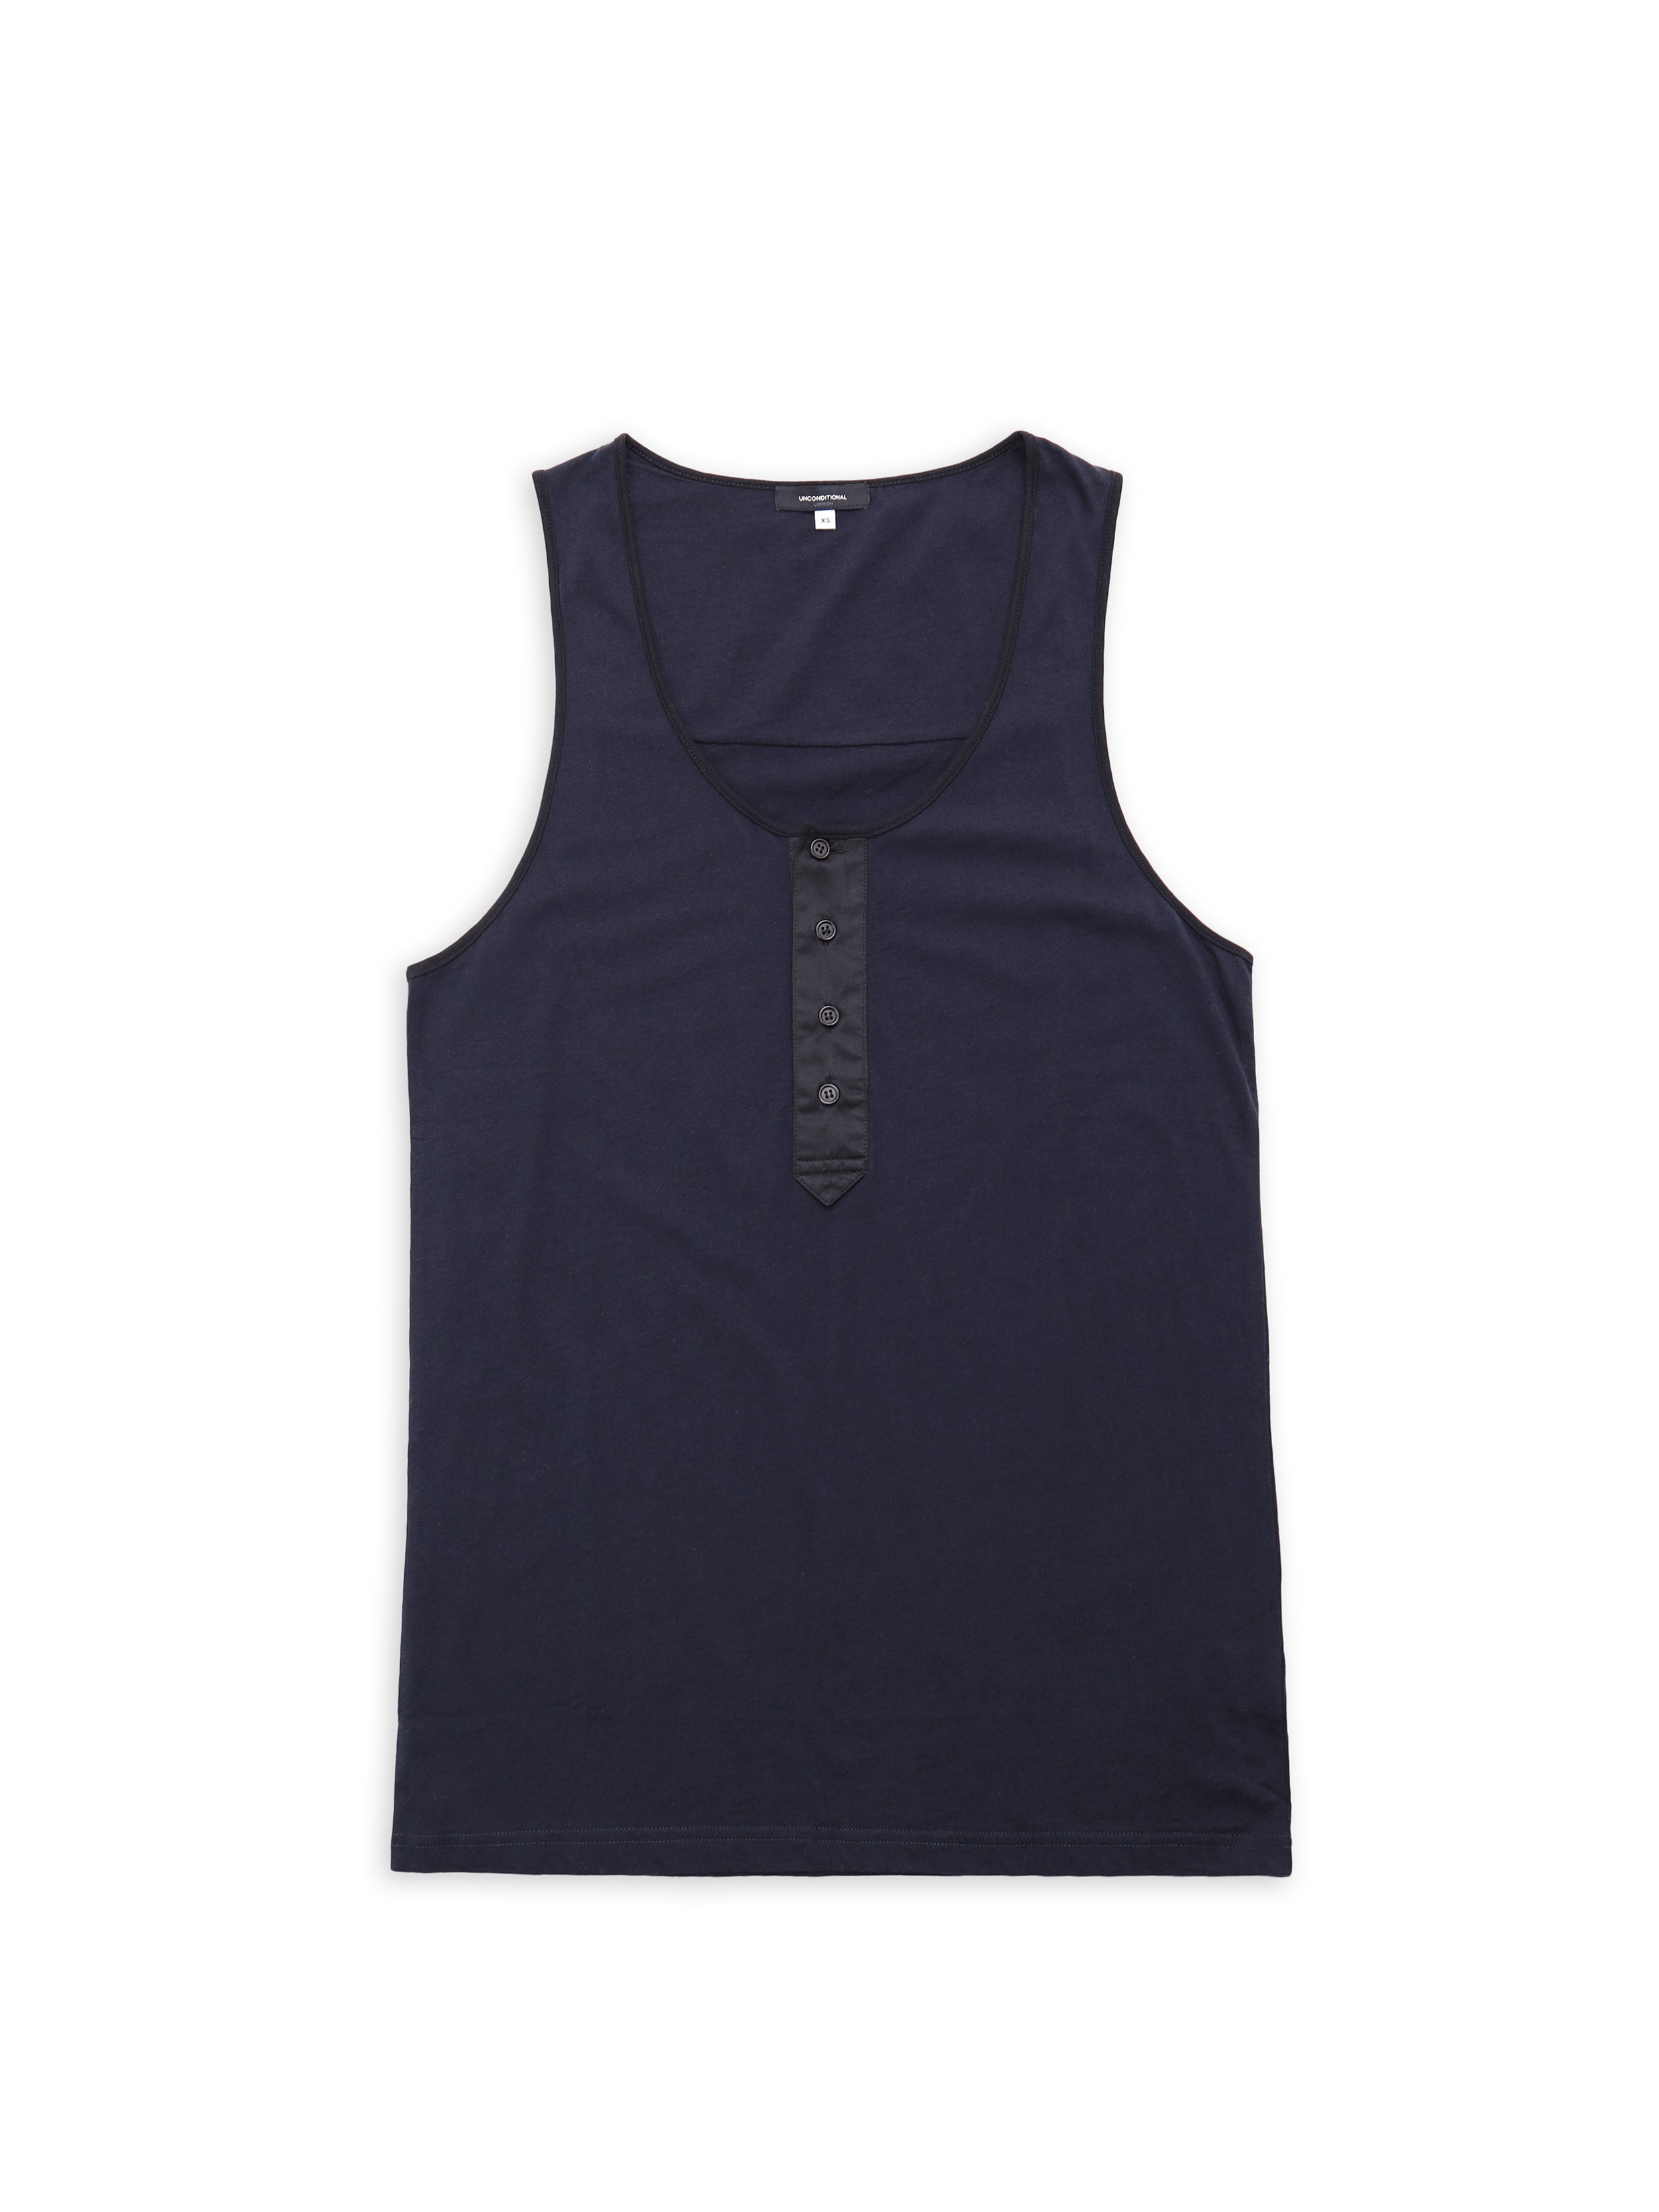 Navy Blue Vest With Buttons Detailing